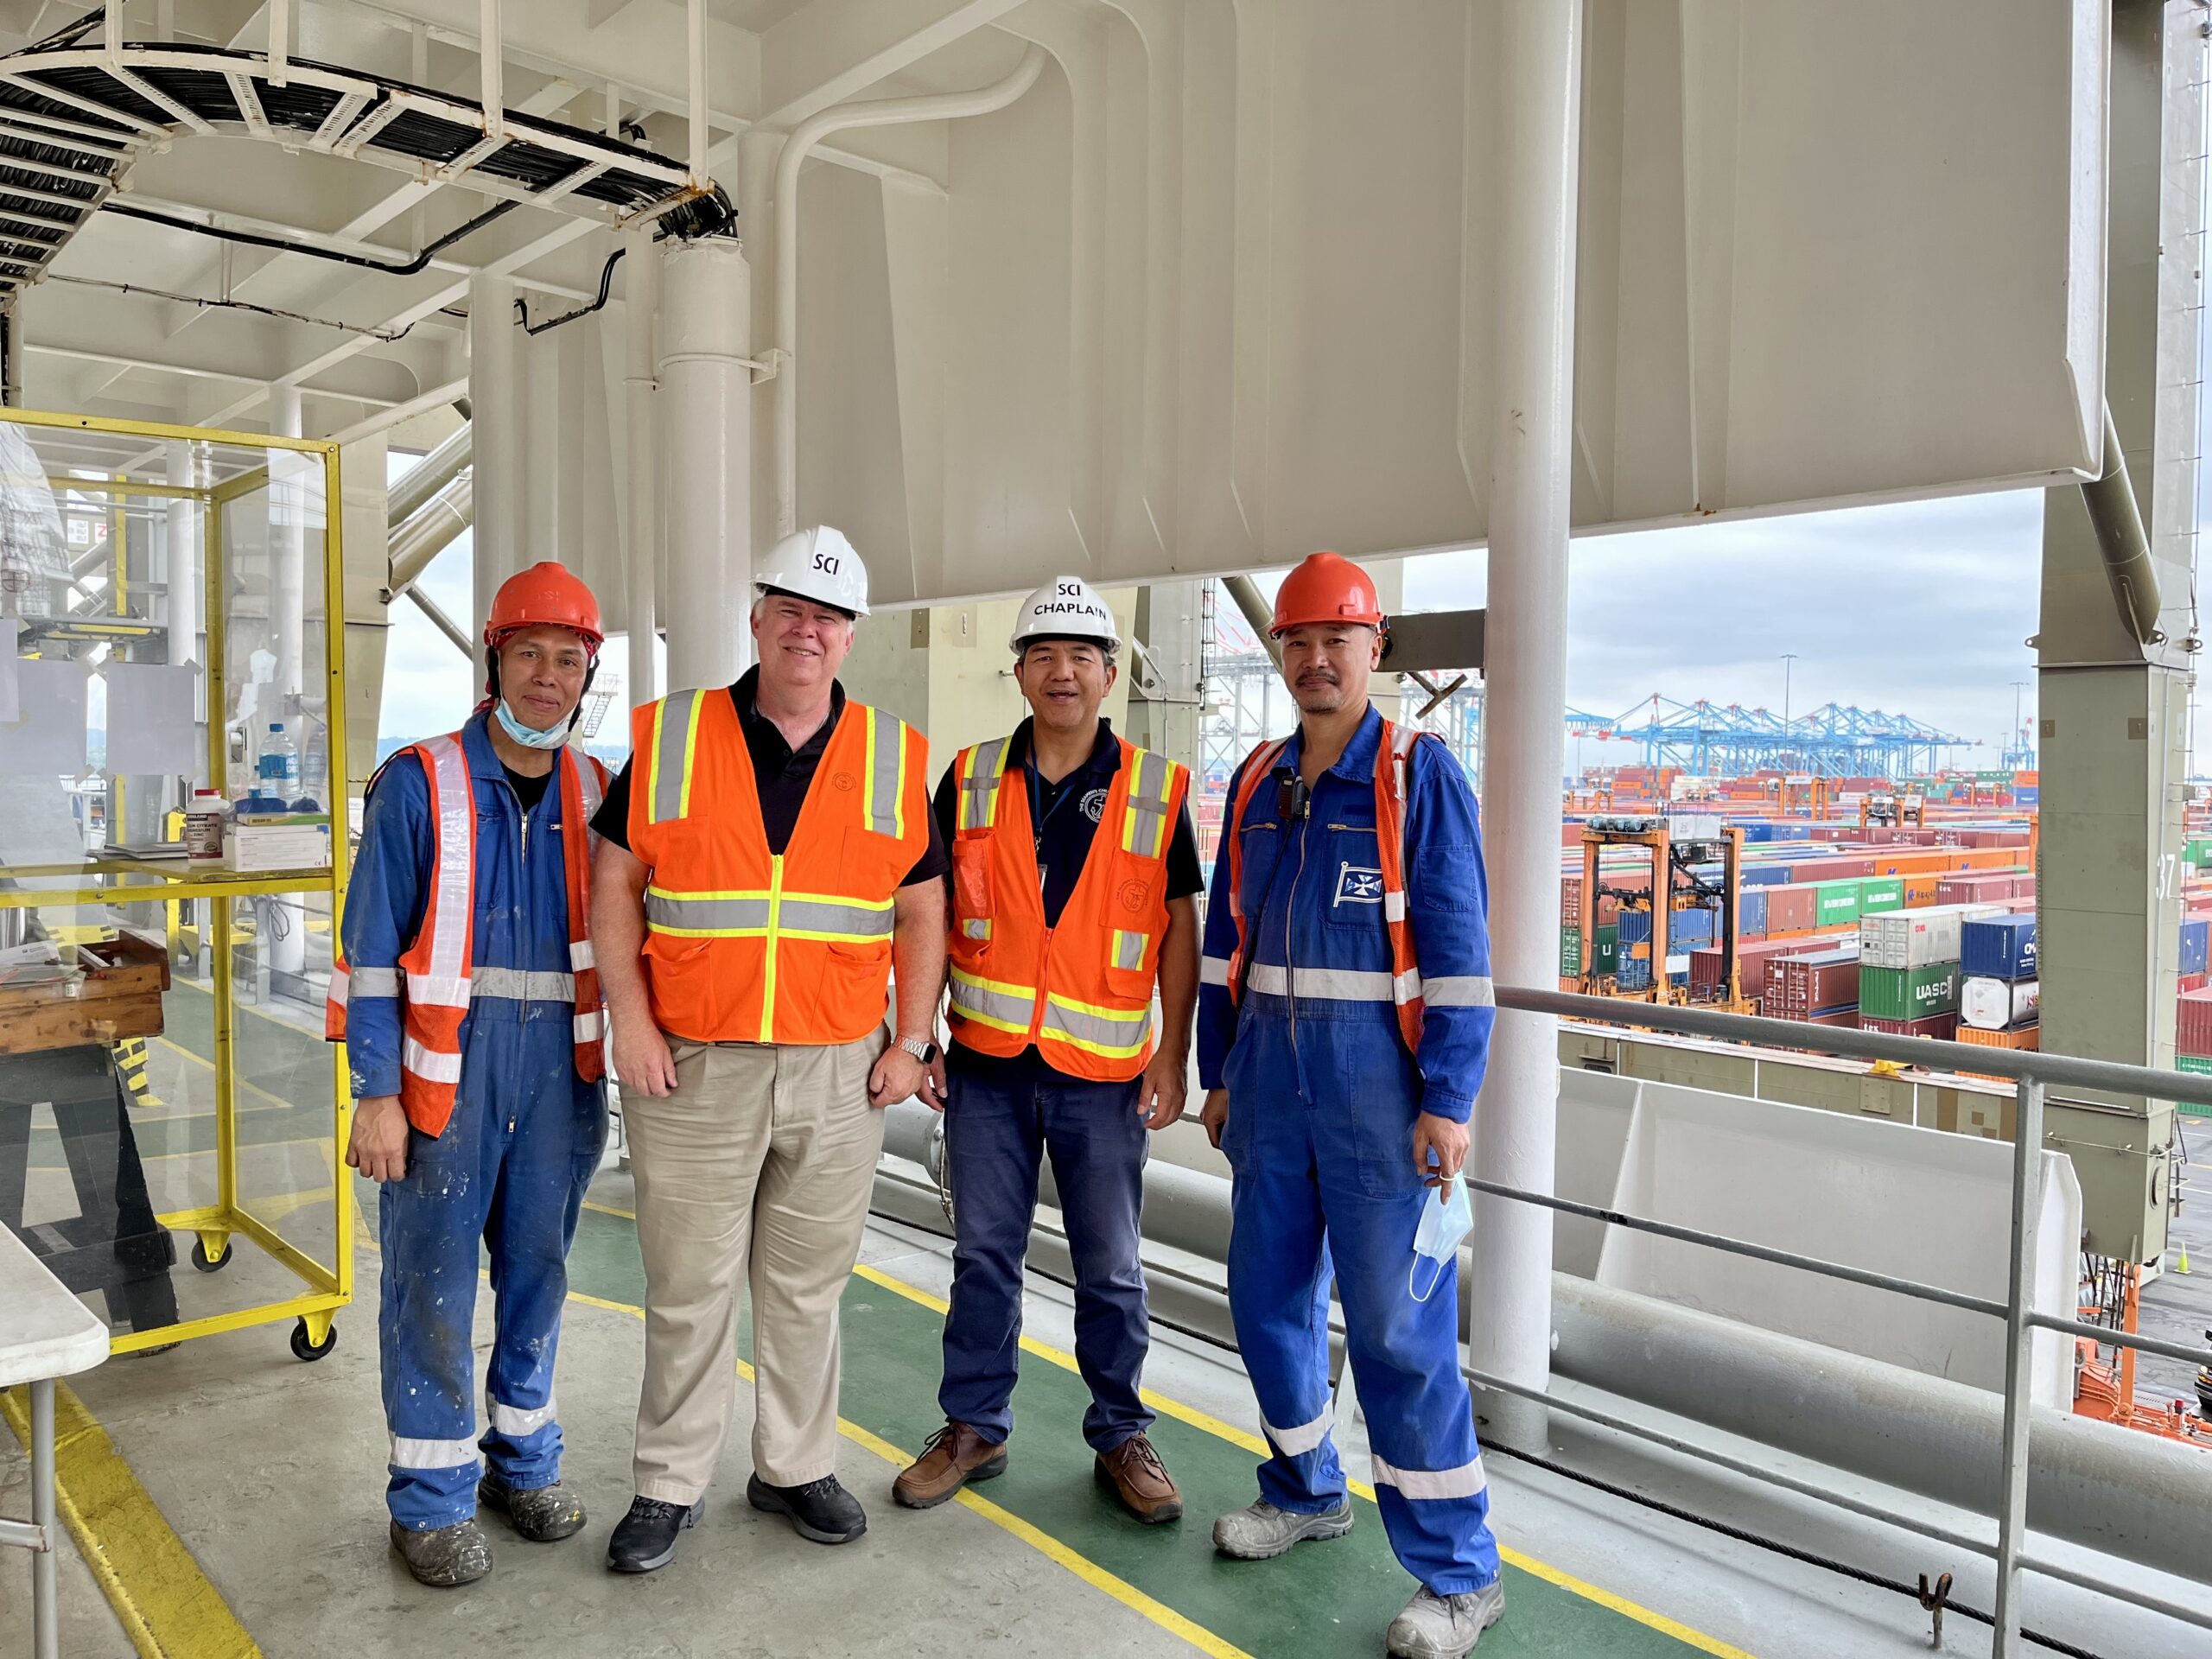 Kollin and Welch posing with crew aboard a ship docked in Port Newark